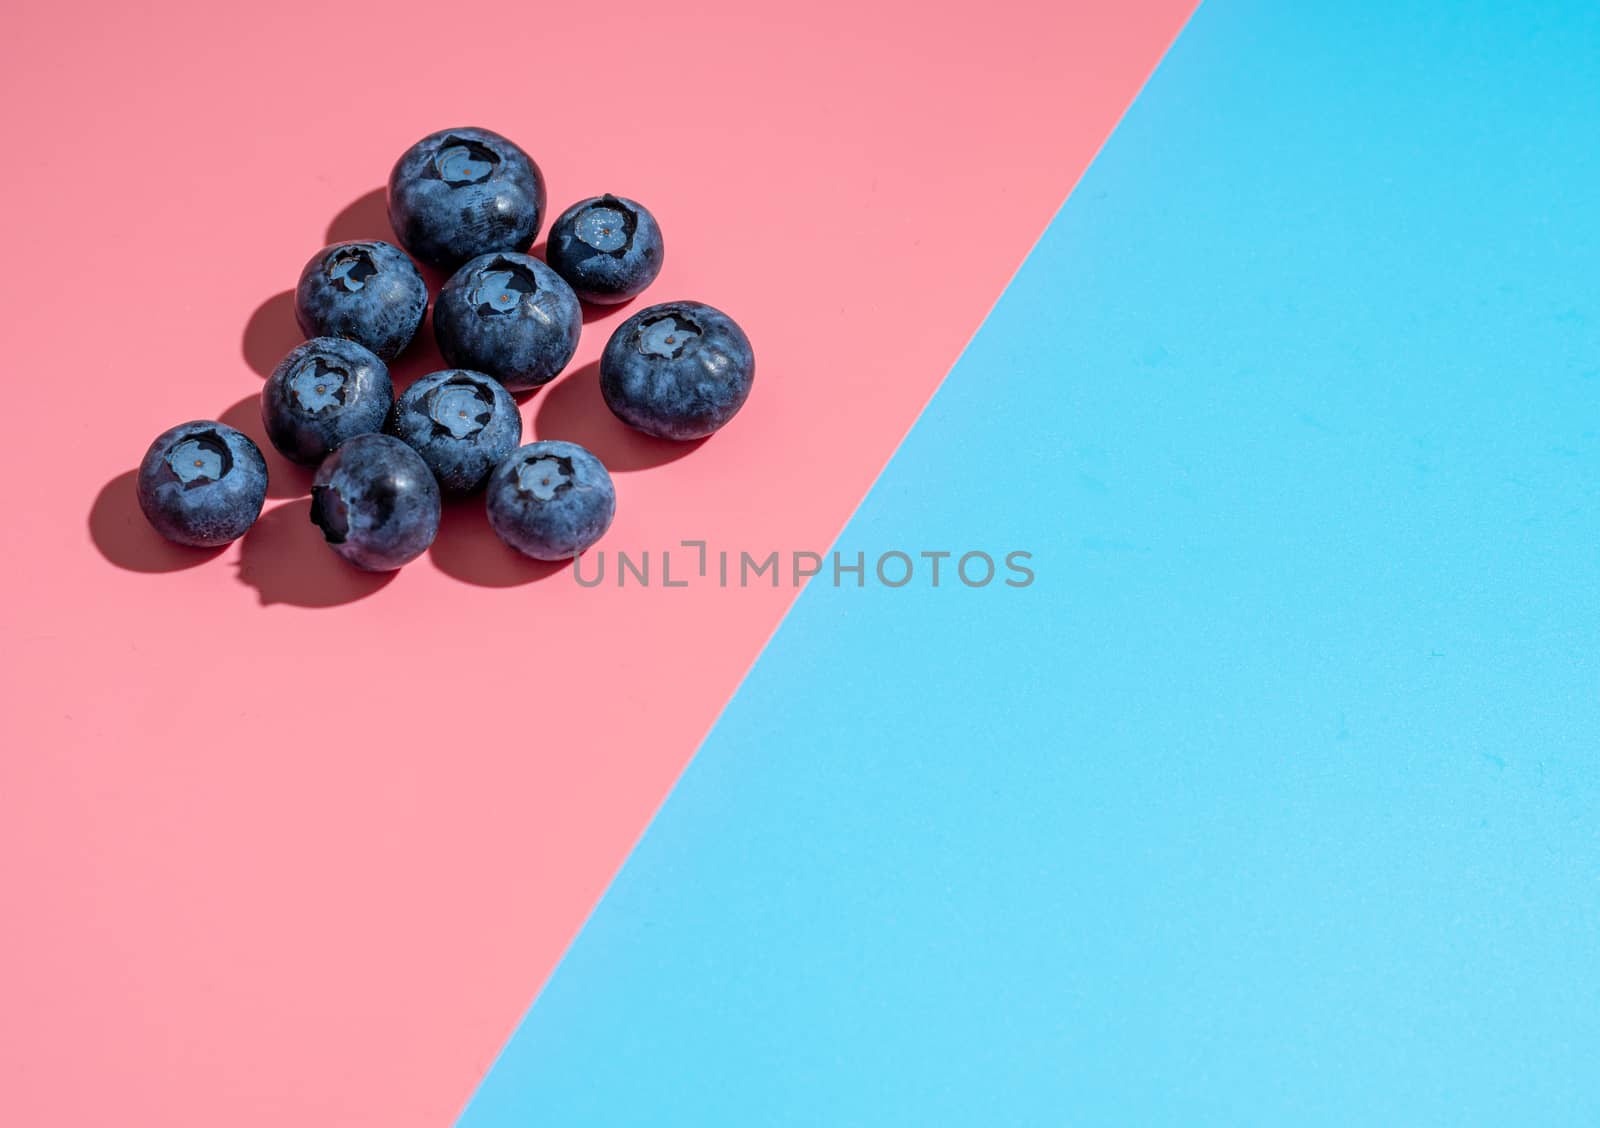 Blueberry on duotone background. Minimalistic concept. Blueberries on pink and blue background in hard light. Copy space for text or design.